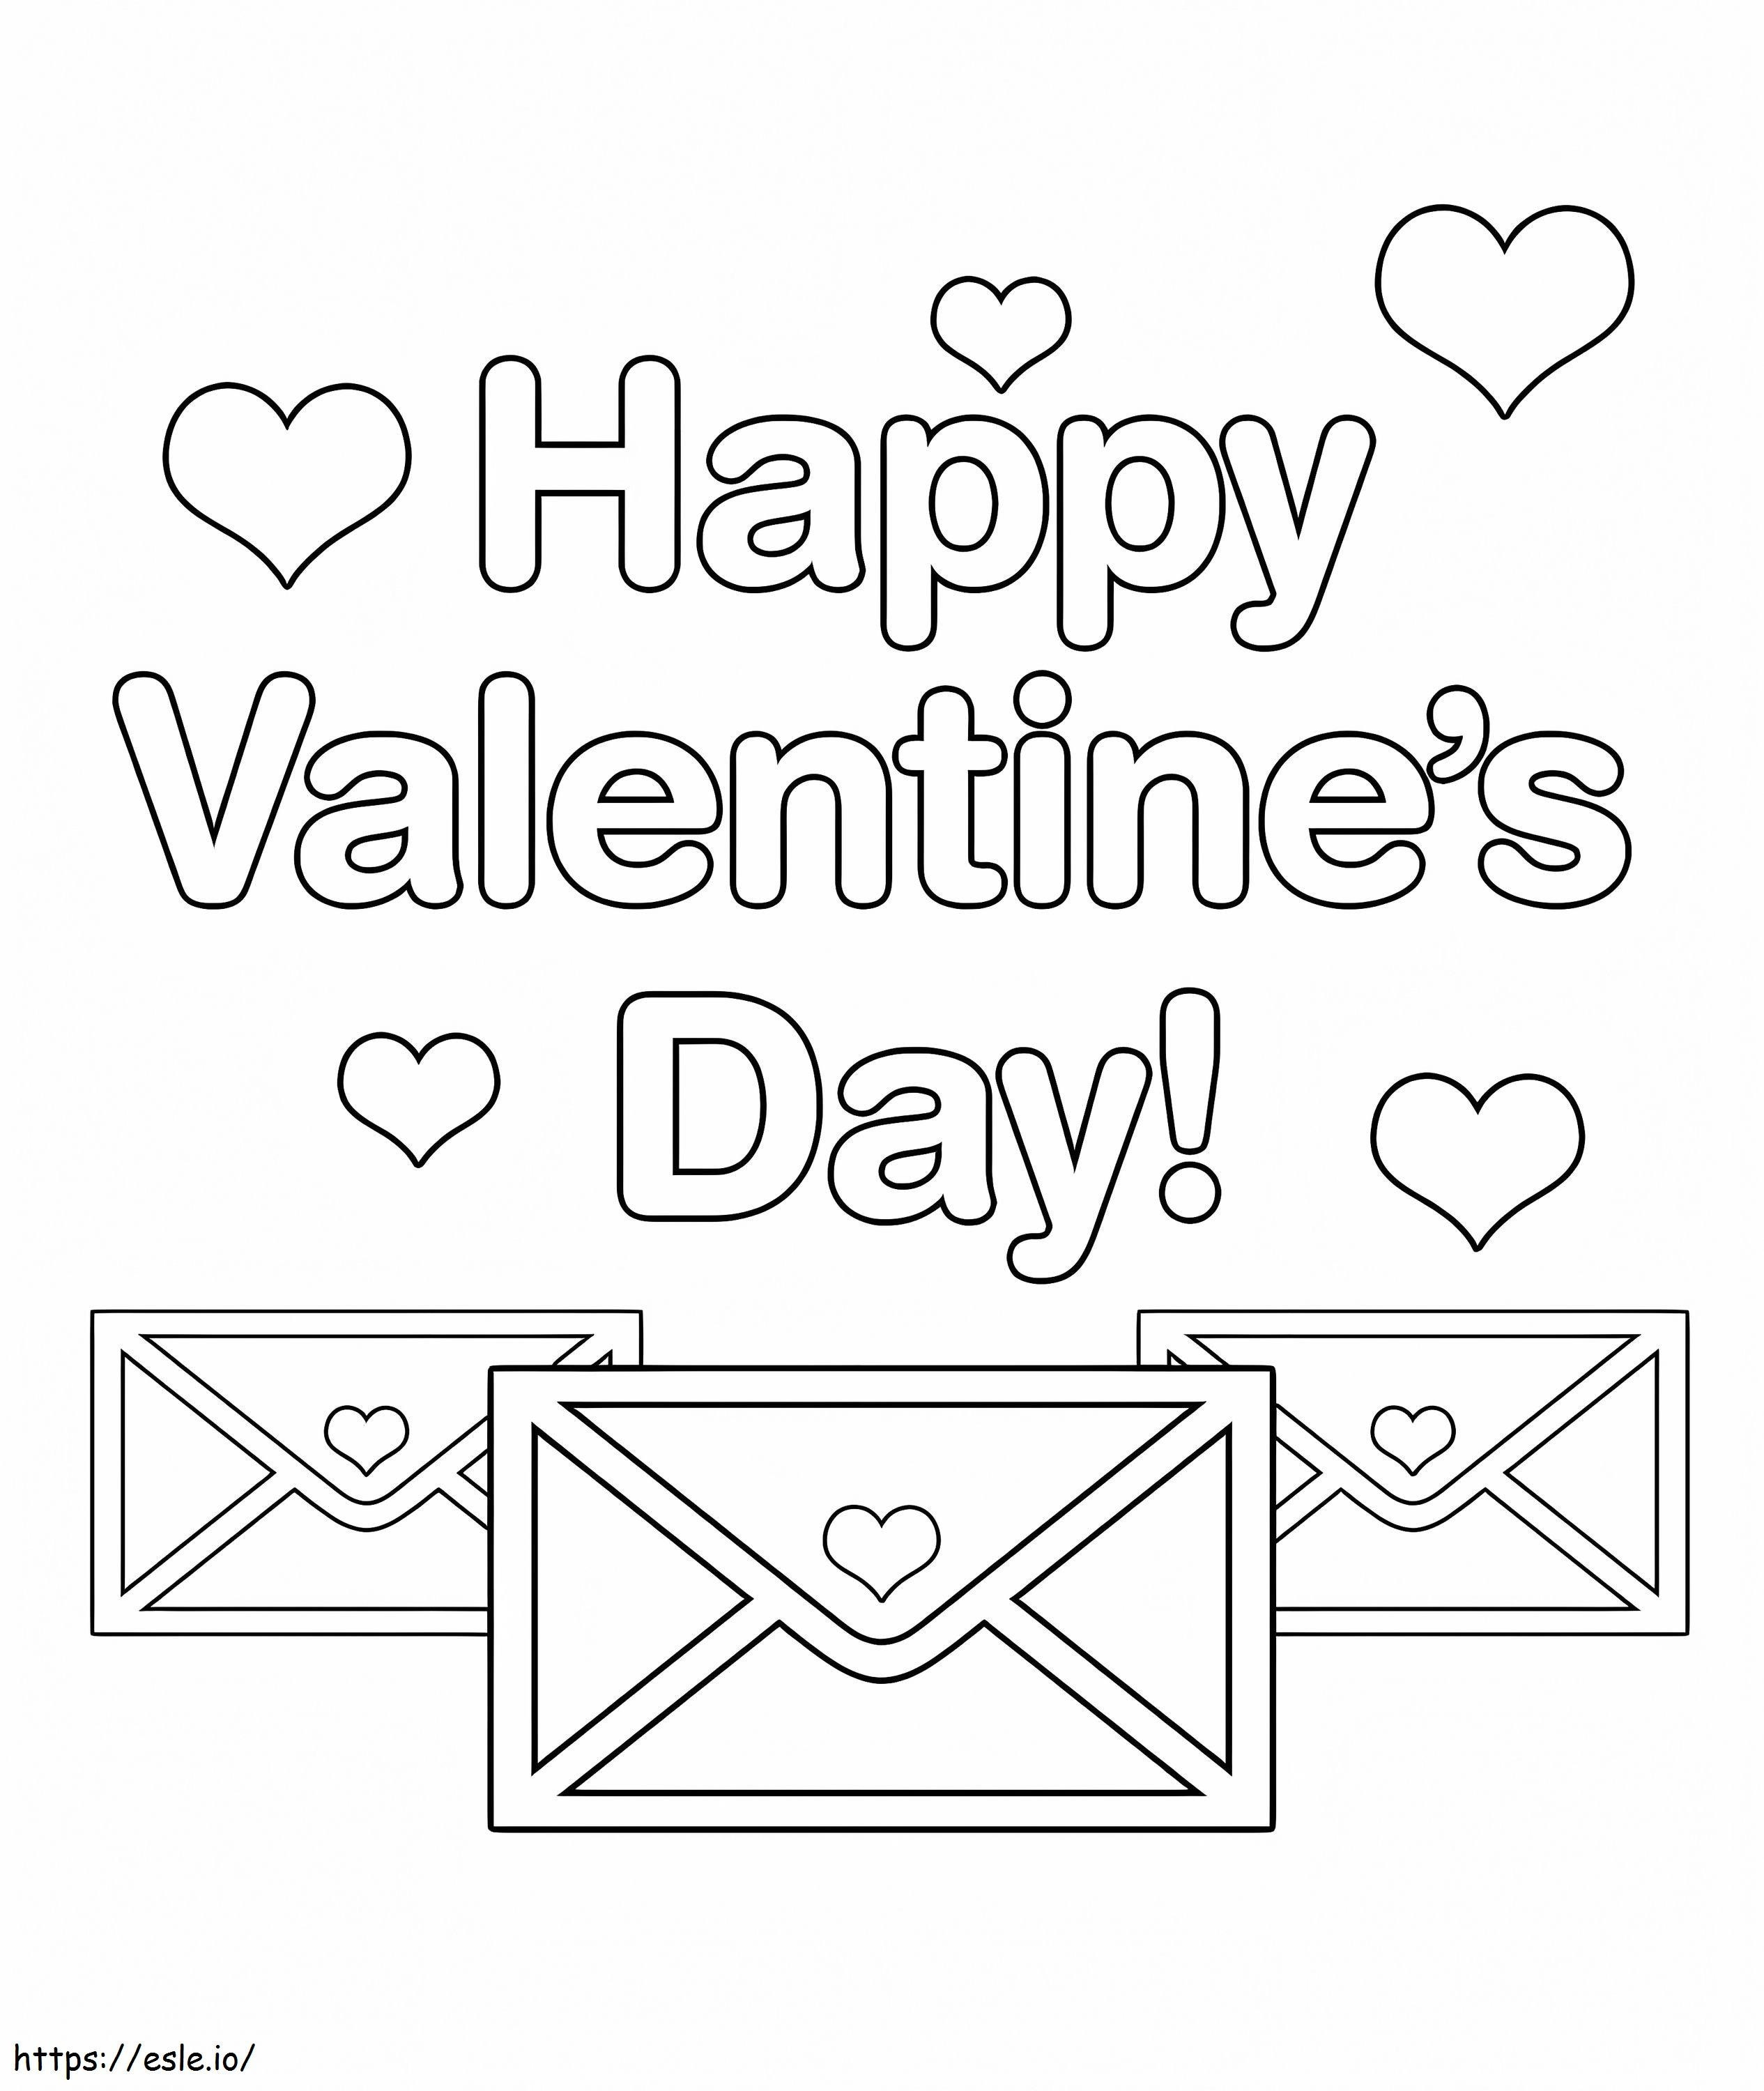 Happy Valentines Day 2 coloring page